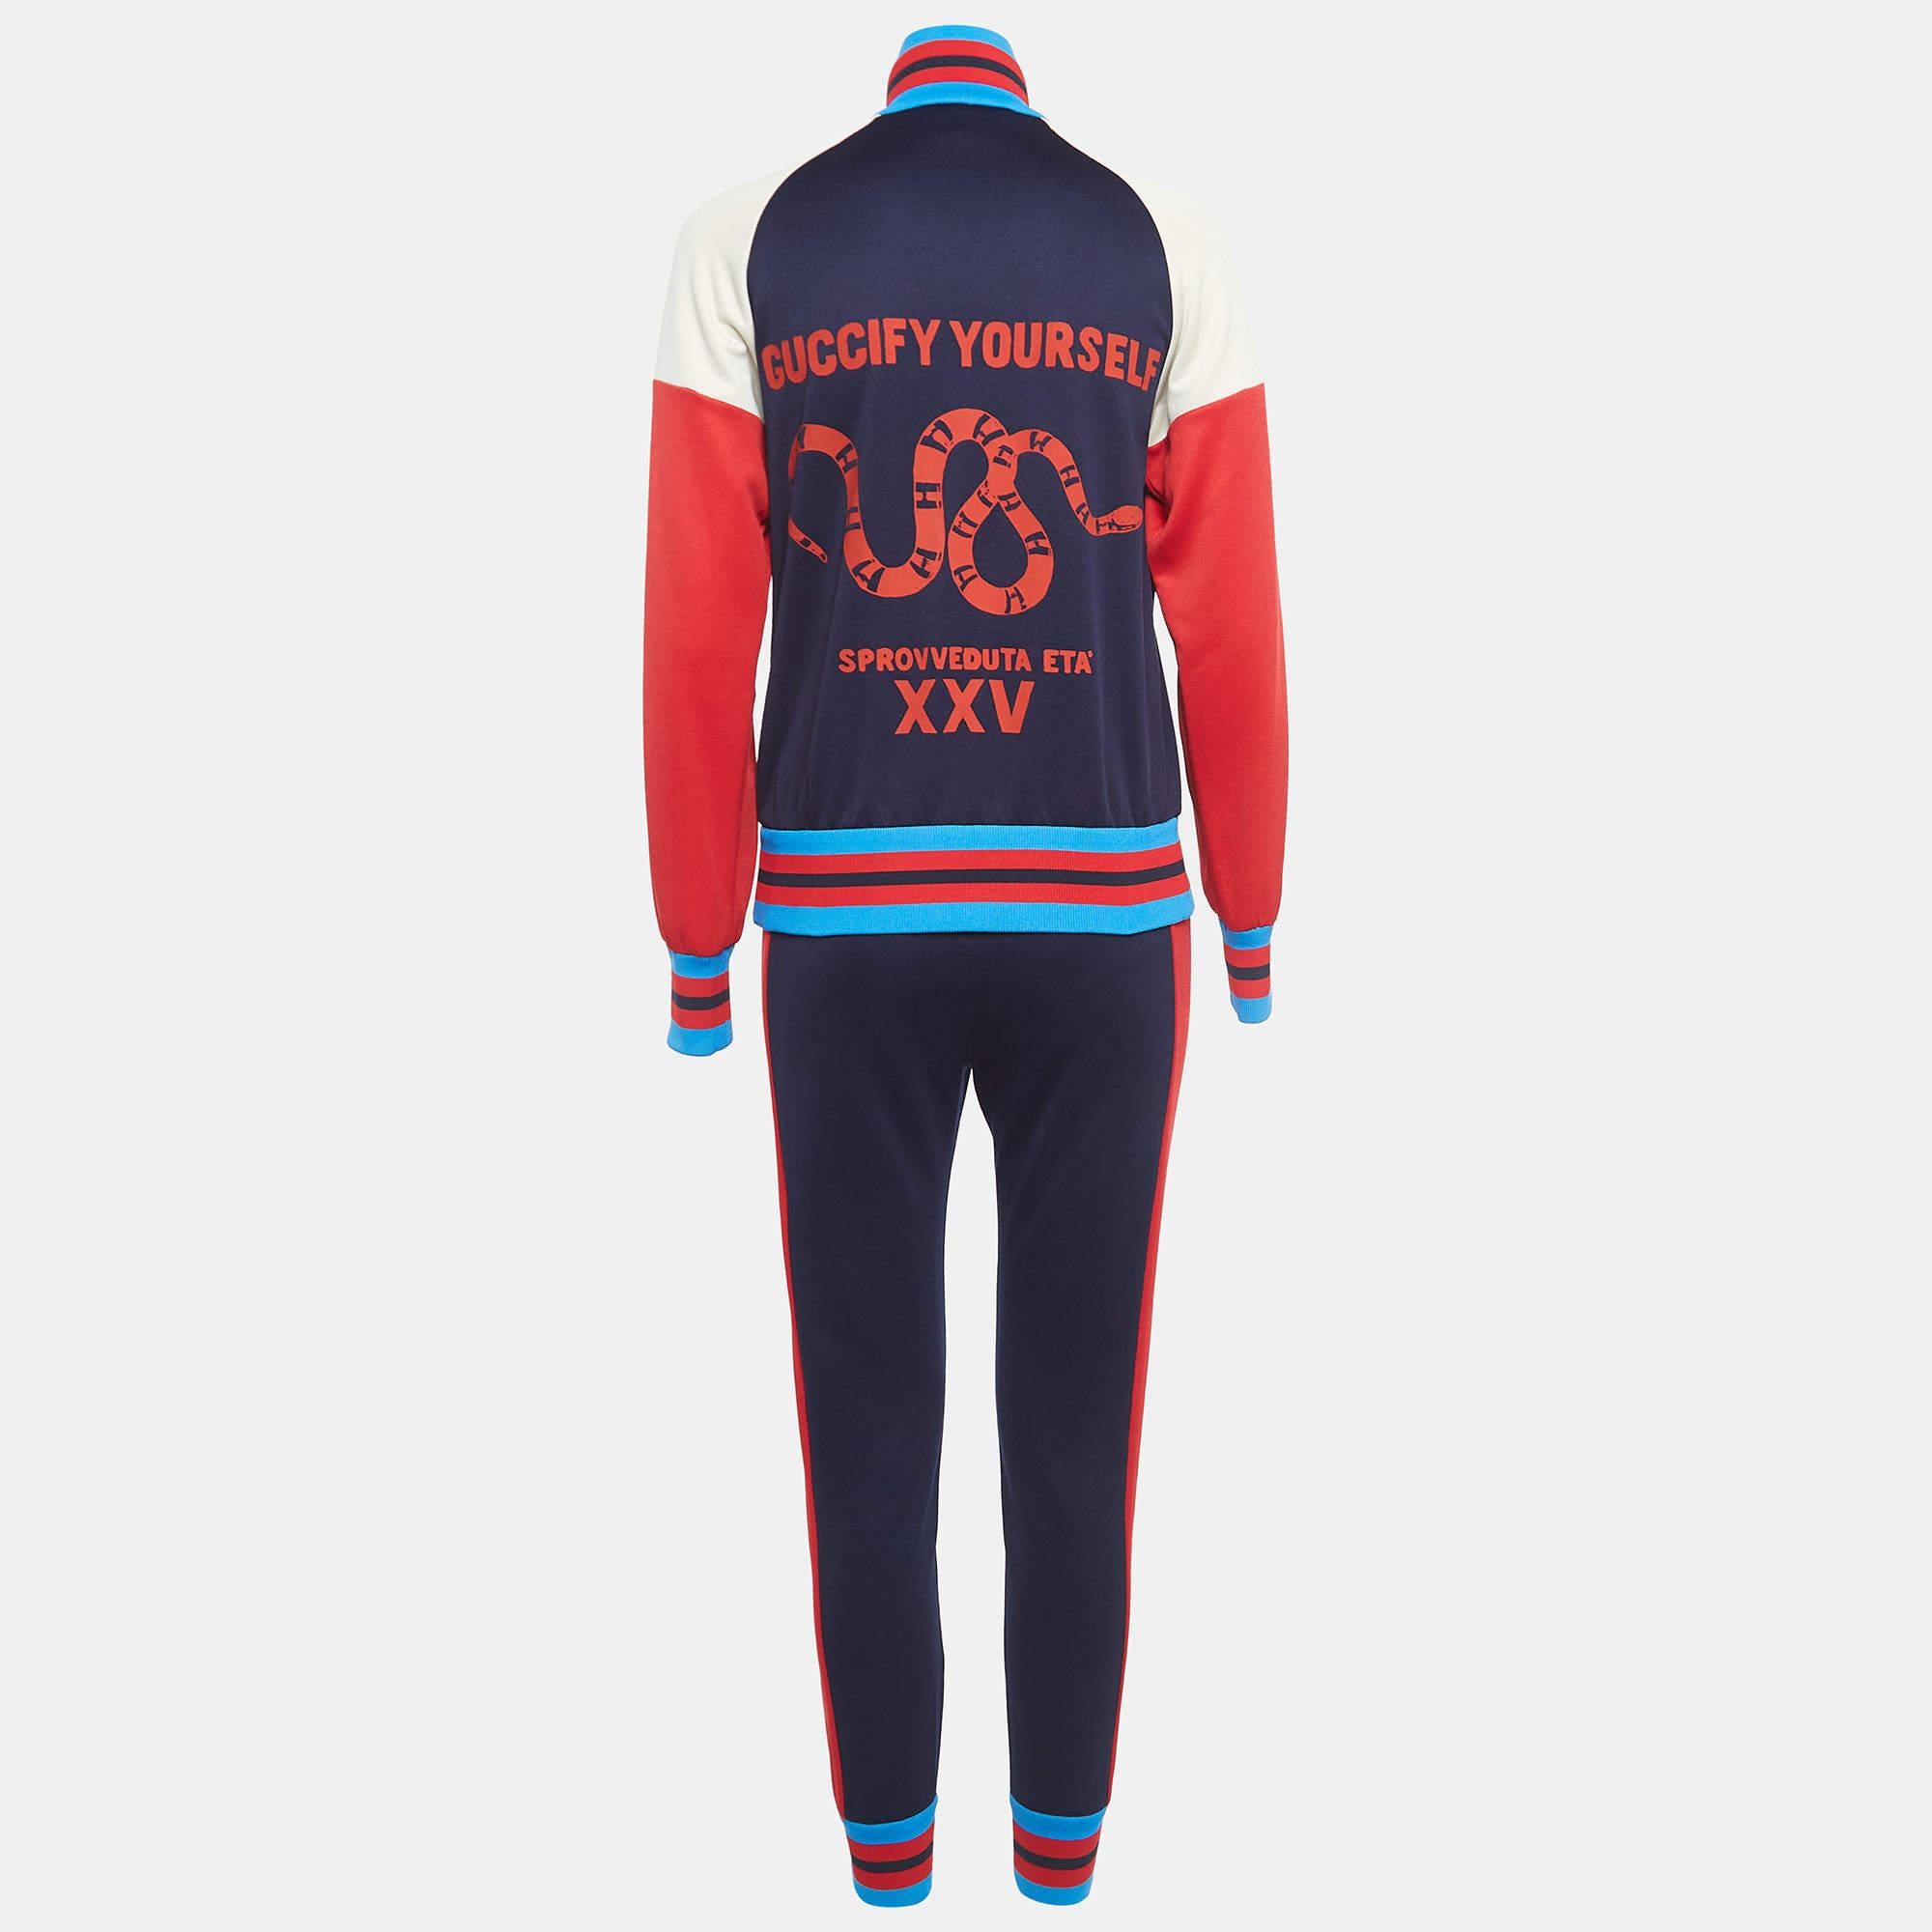 The Gucci tracksuit set embodies luxury and athleticism with its sleek design and premium materials. Crafted from a high-quality technical jersey, this set features a rich navy blue color complemented by vibrant red accents, exuding sophistication